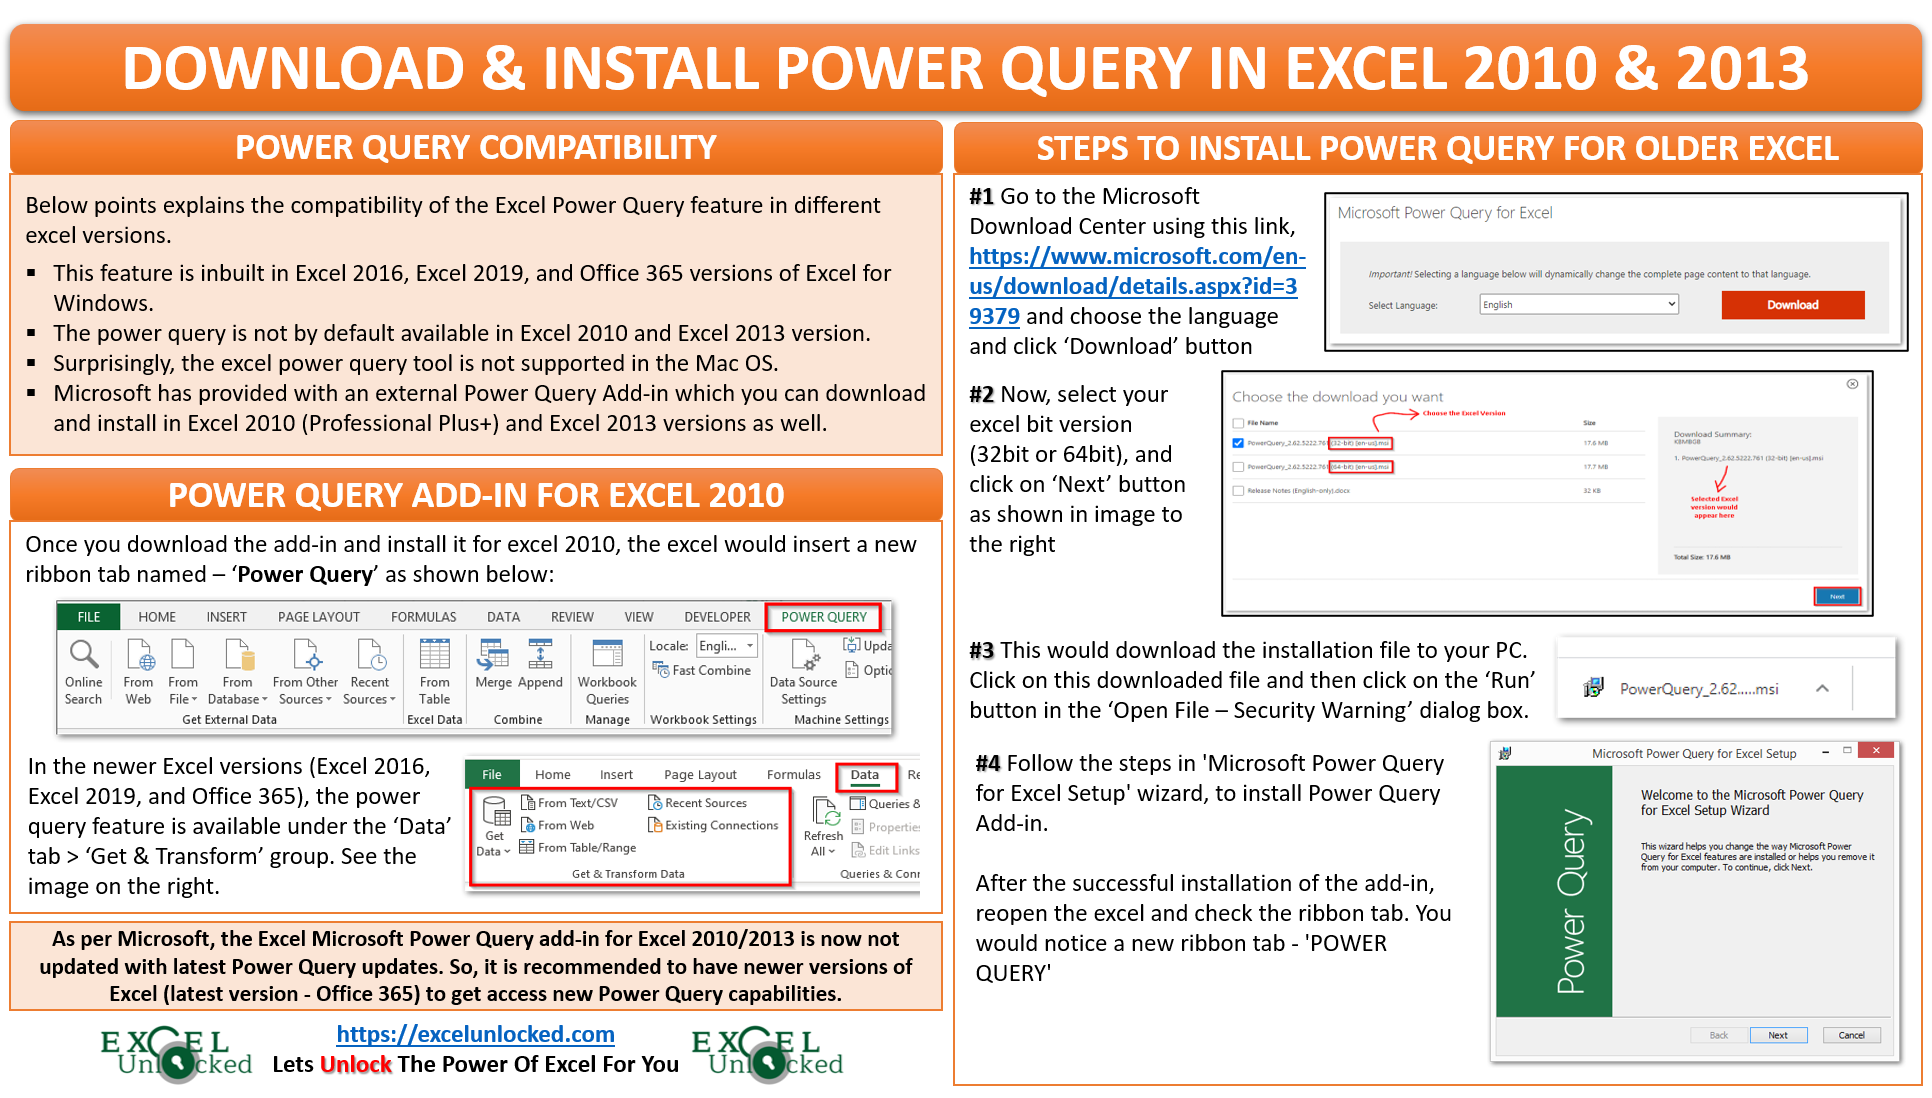 Grace Reflection I'm sorry Install Power Query in Excel 2010 [Step by Step Guide] - Excel Unlocked